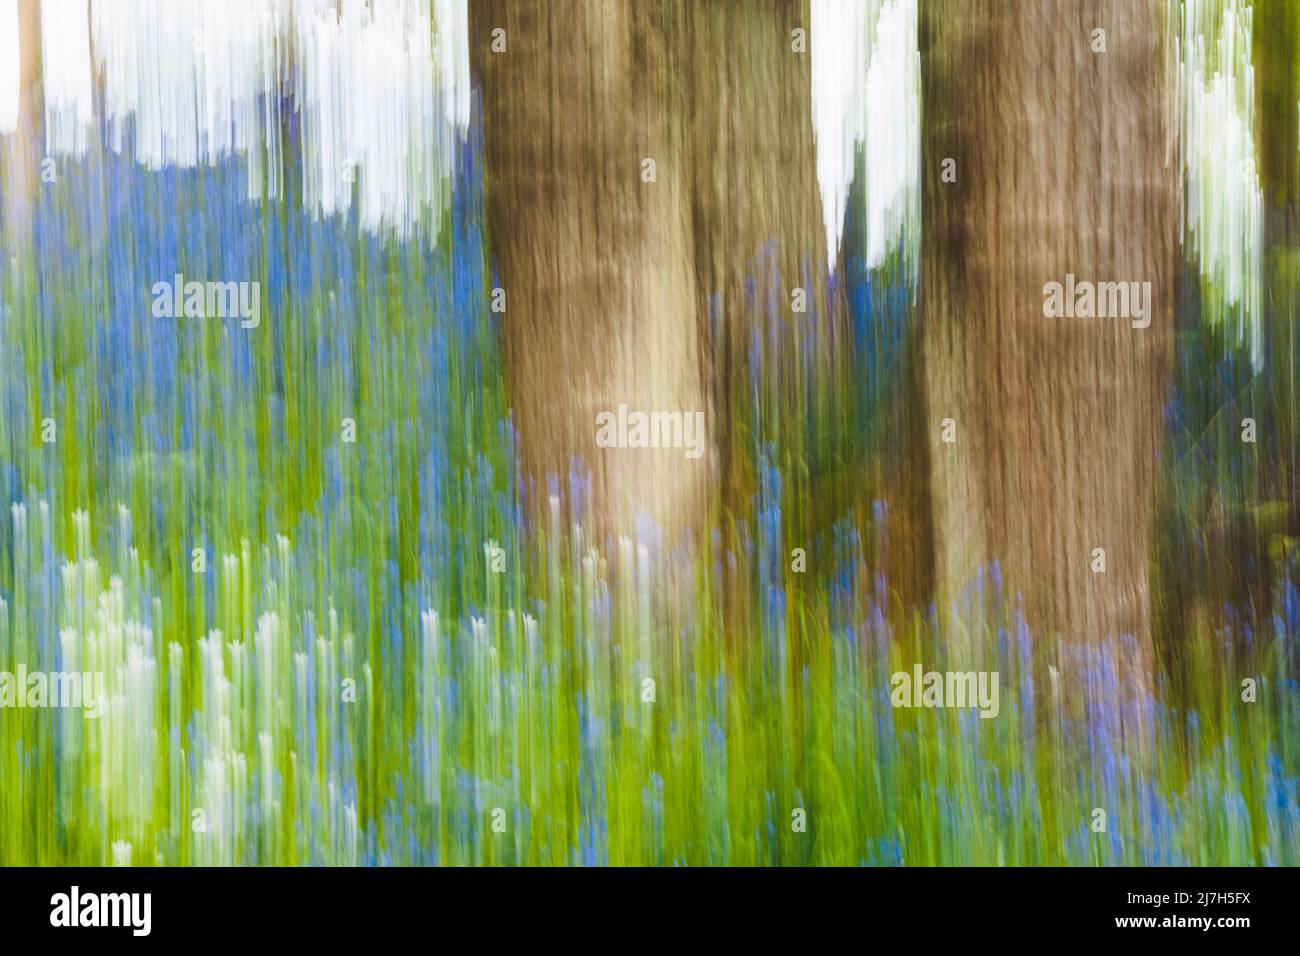 Icm landscapes hires stock photography and images Alamy